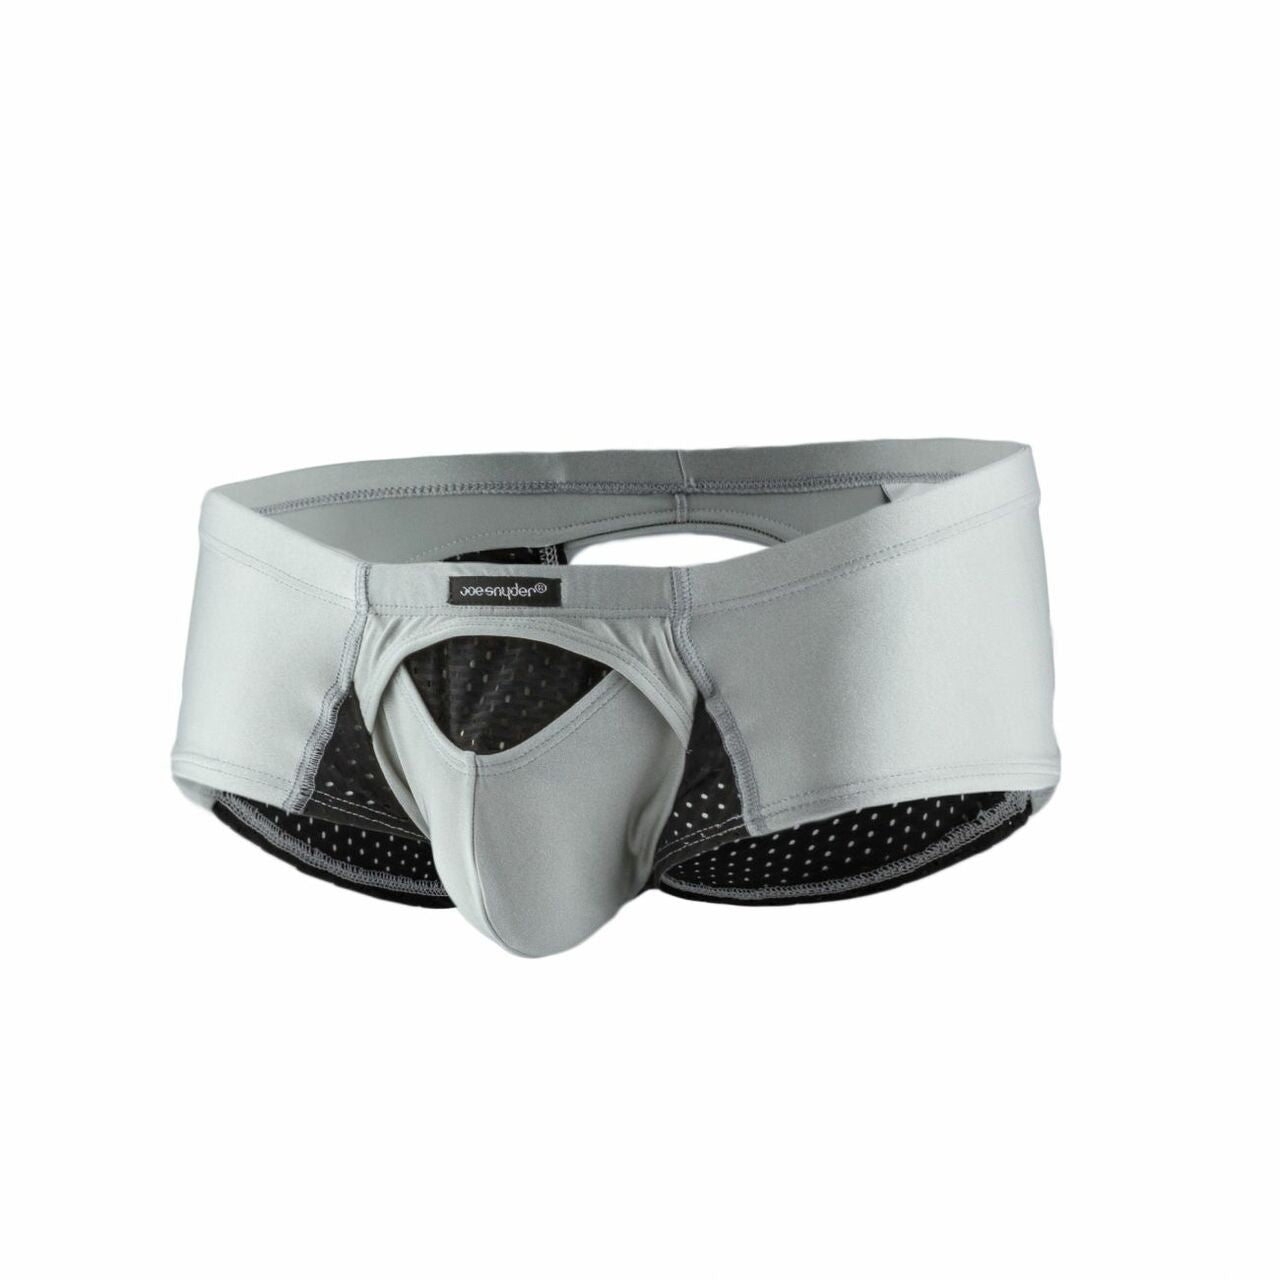 SALE - Mens Joe Snyder Sexiest Cheek Boxer Brief Black and Gray